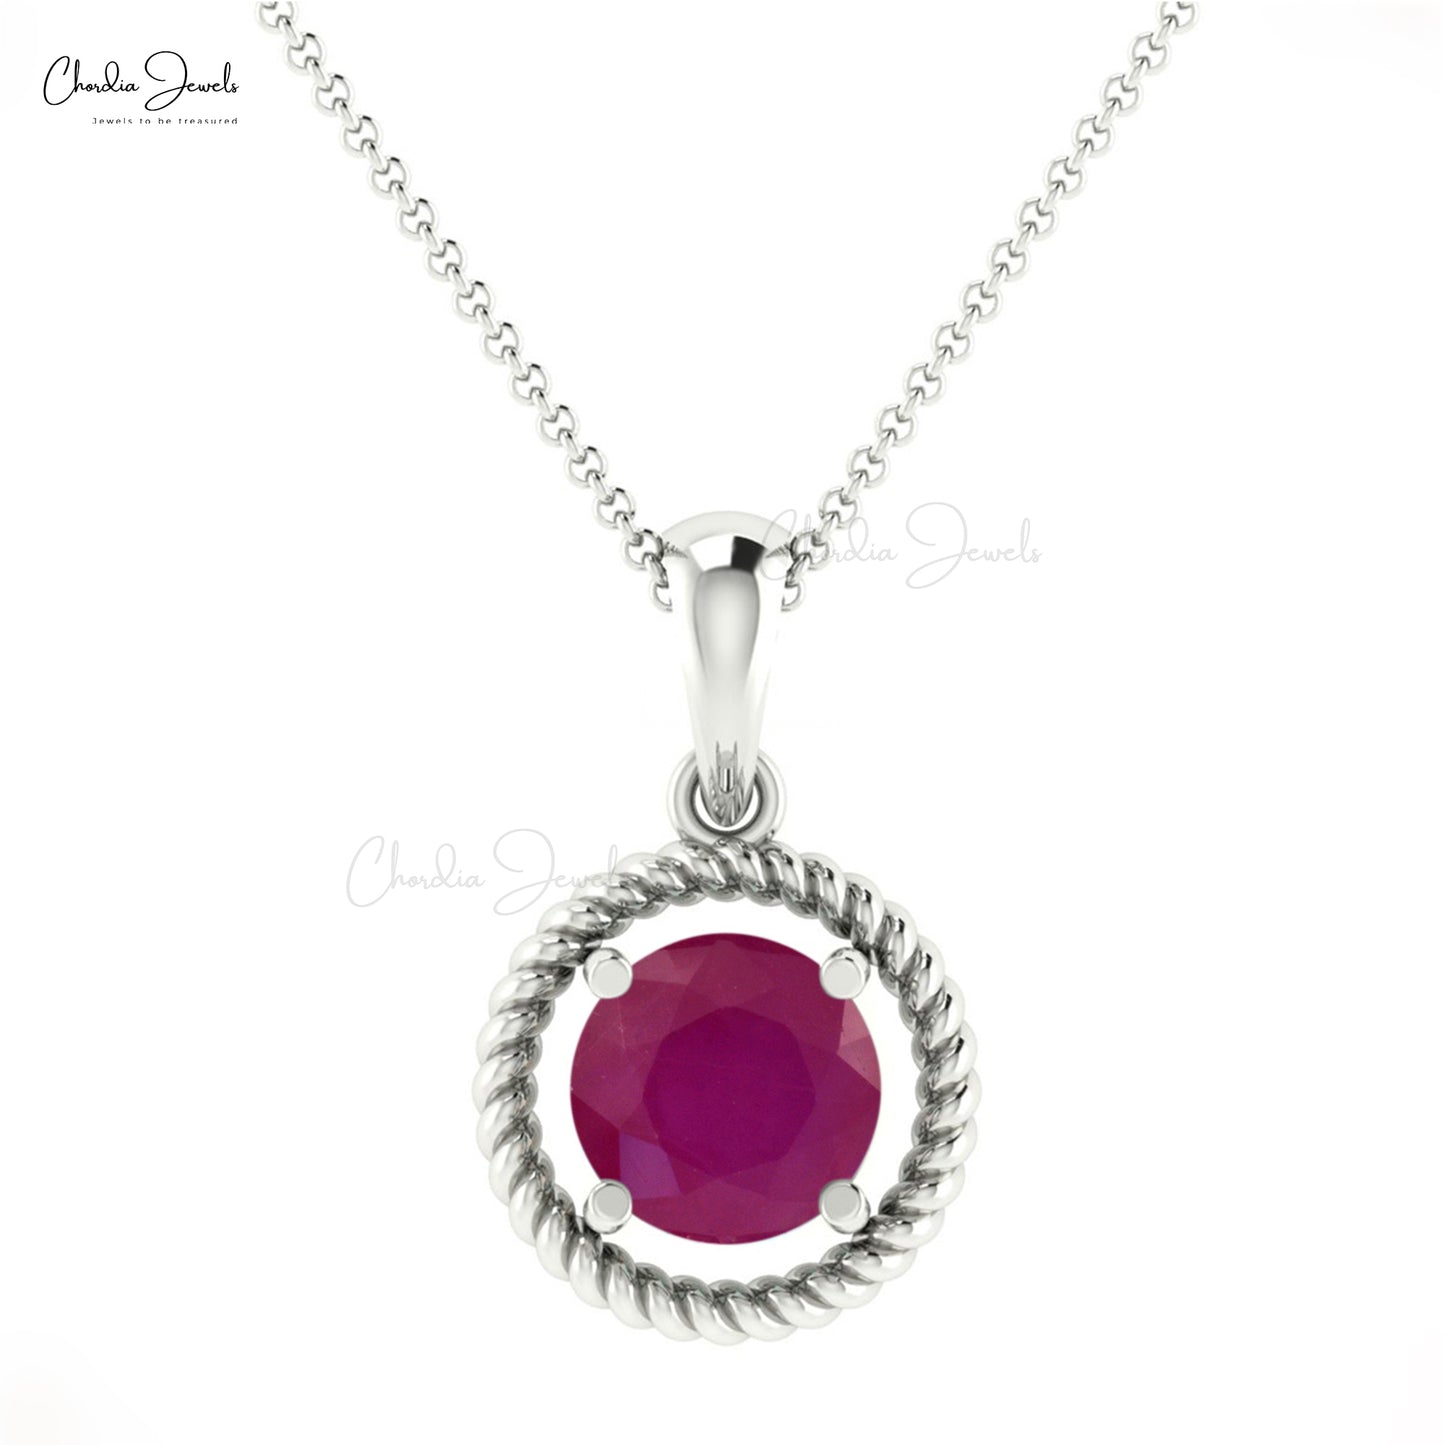 Natural Ruby 0.47carat Spiral Pendant 14k Real Gold July Birthstone Pendant For Women